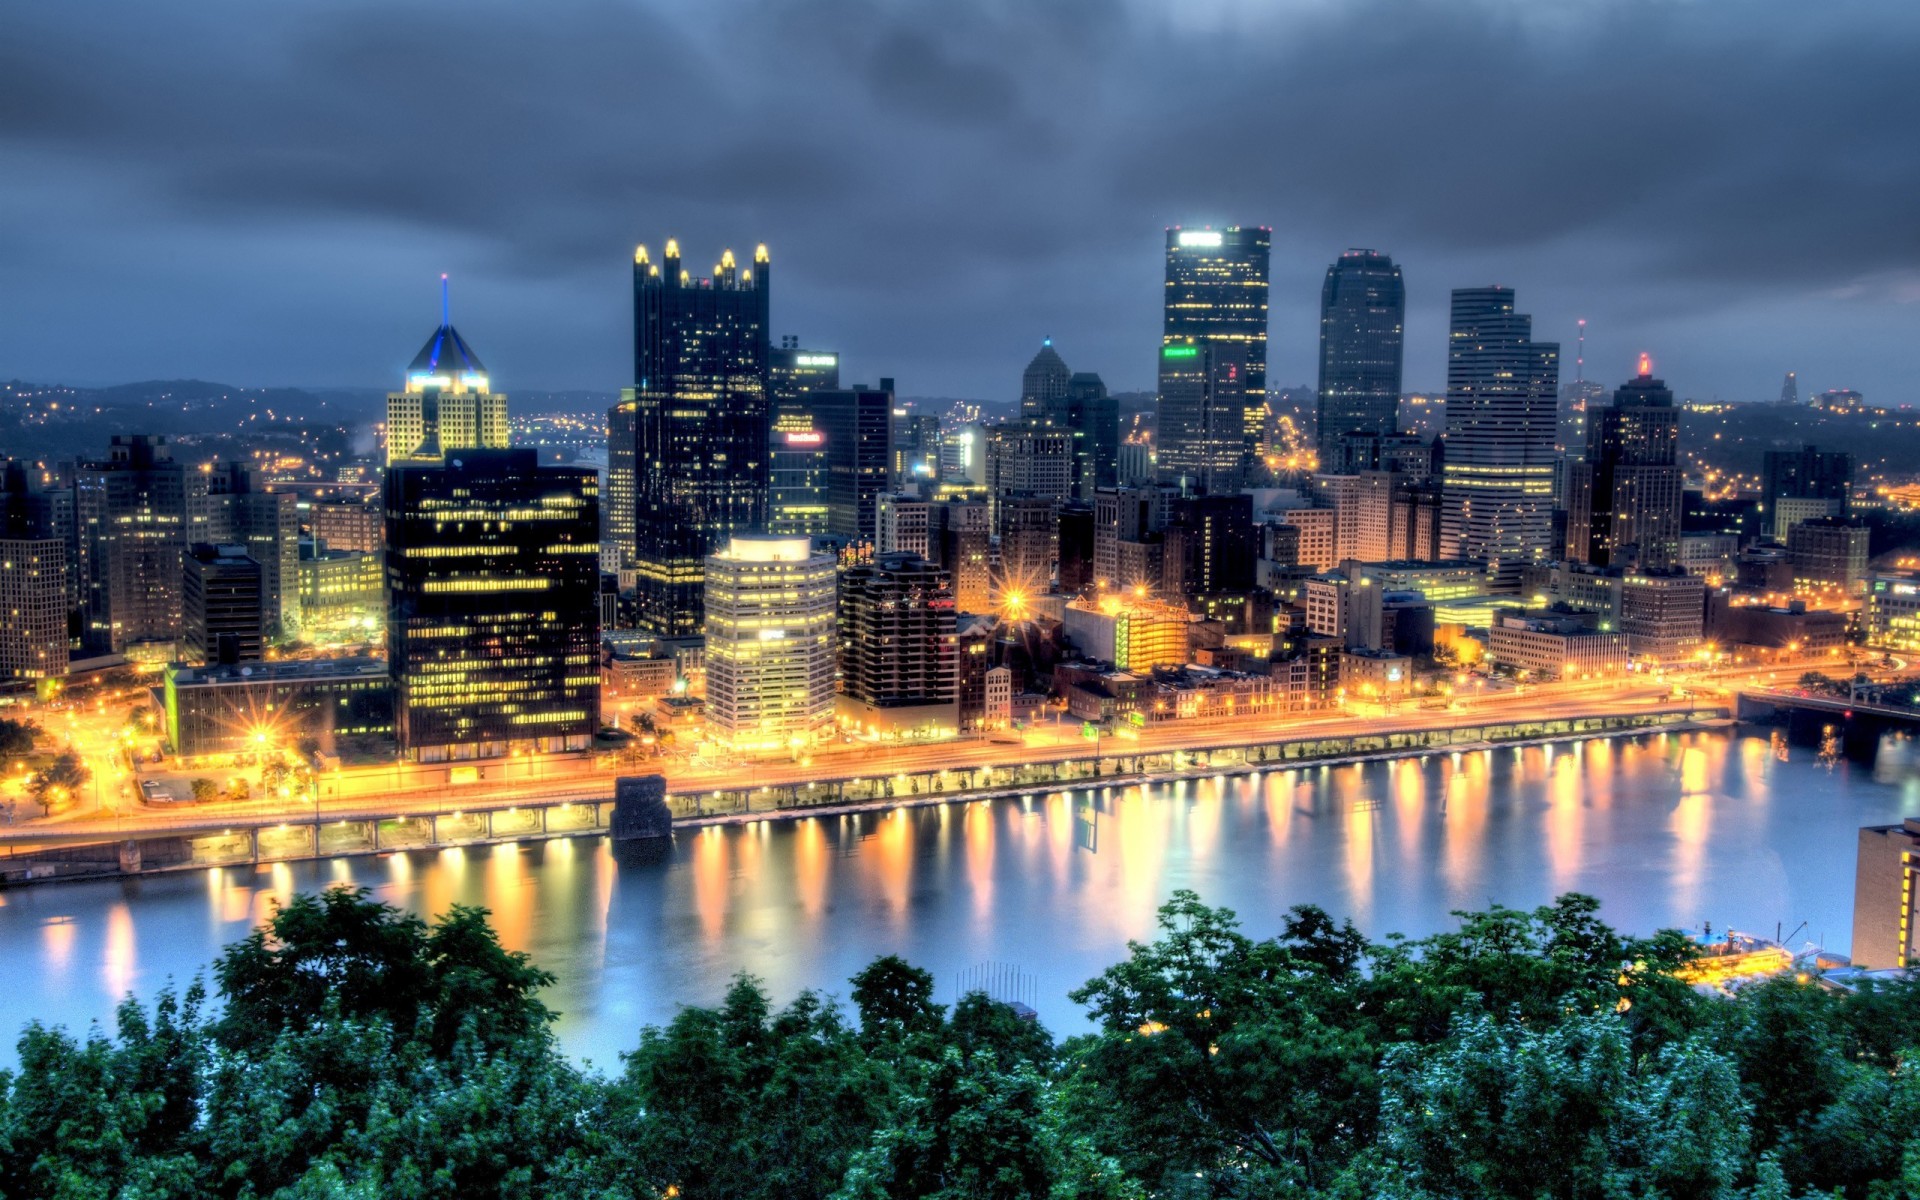 USA Pennsylvania Pittsburgh city town hdr wallpaper background